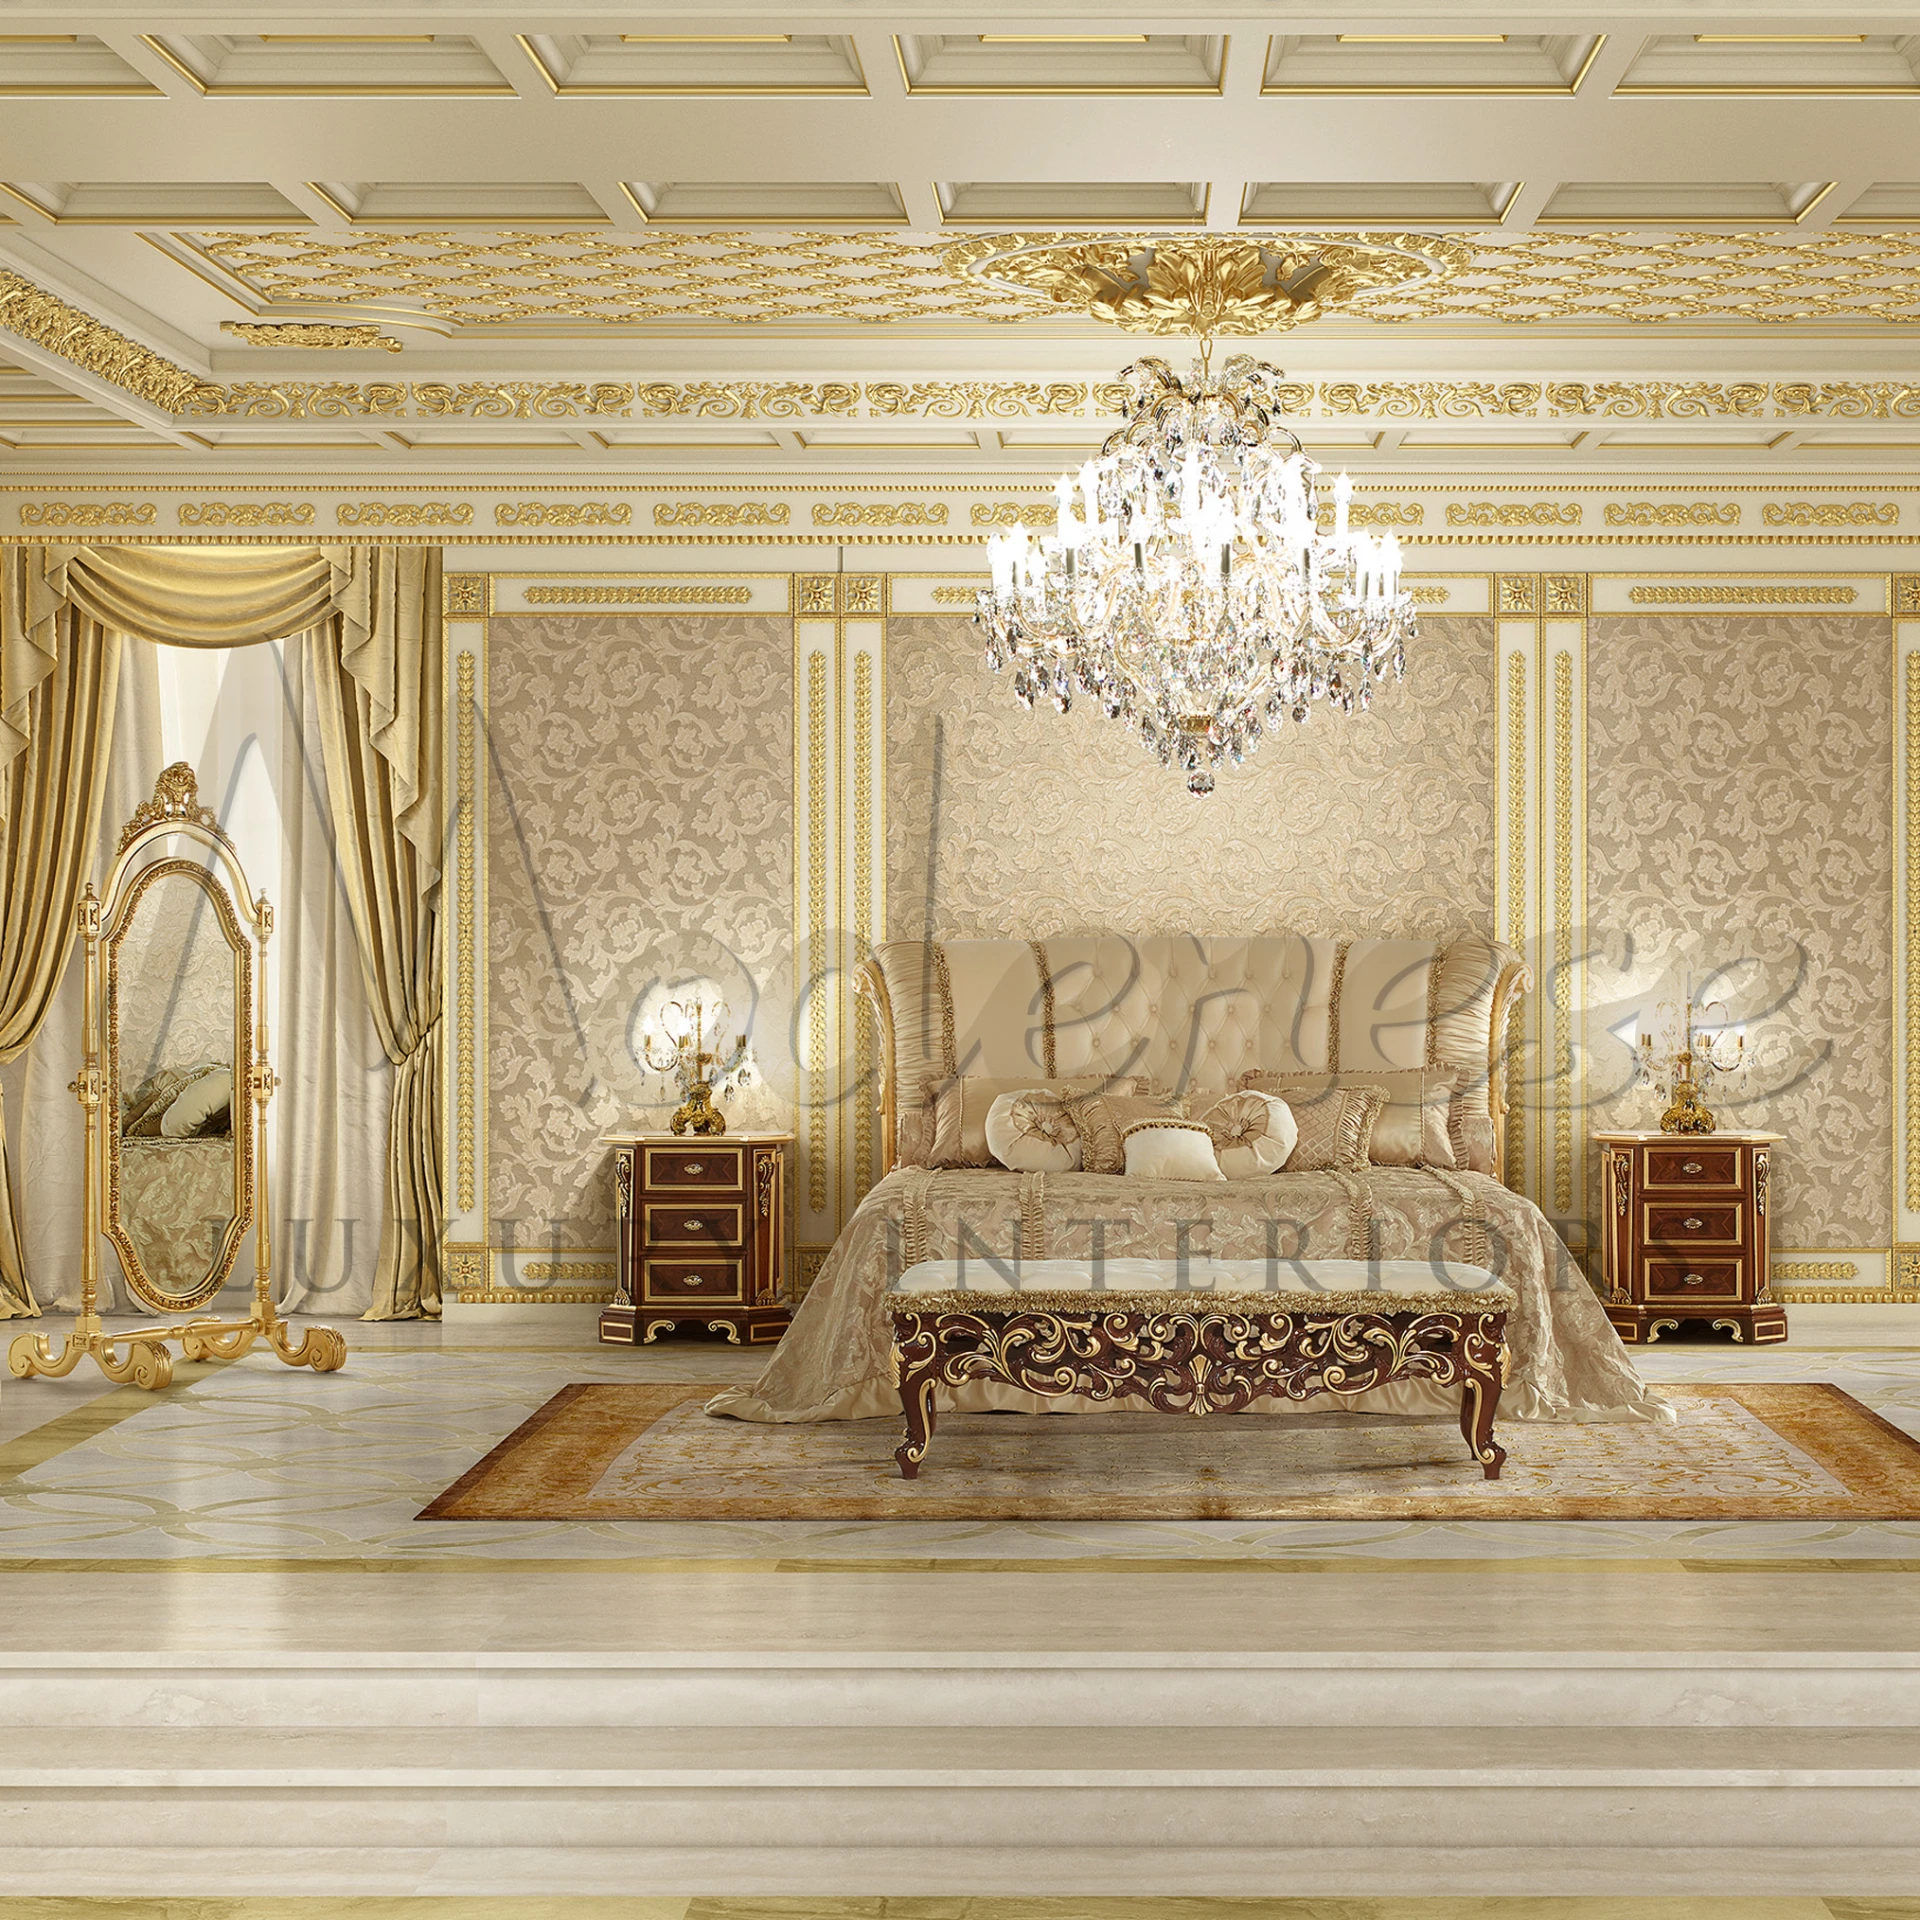  A grand bedroom that radiates opulence and classical elegance. A large, luxurious bed with a high, ornate headboard and footboard finished in dark wood with gold detailing is positioned centrally. 